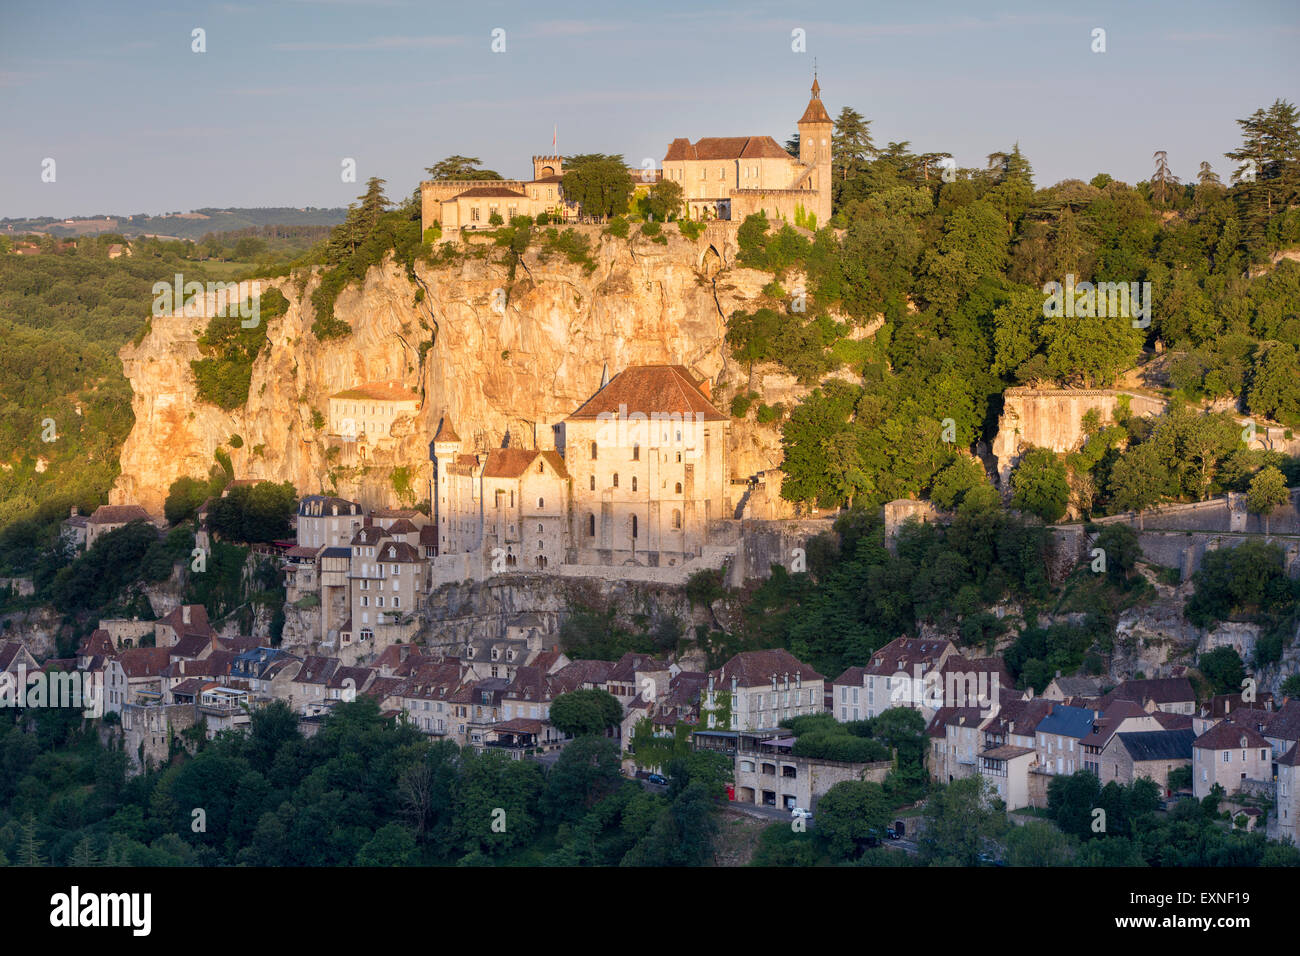 Sunrise over Medieval town of Rocamadour, Lot Department, Midi-Pyrenees, France Stock Photo